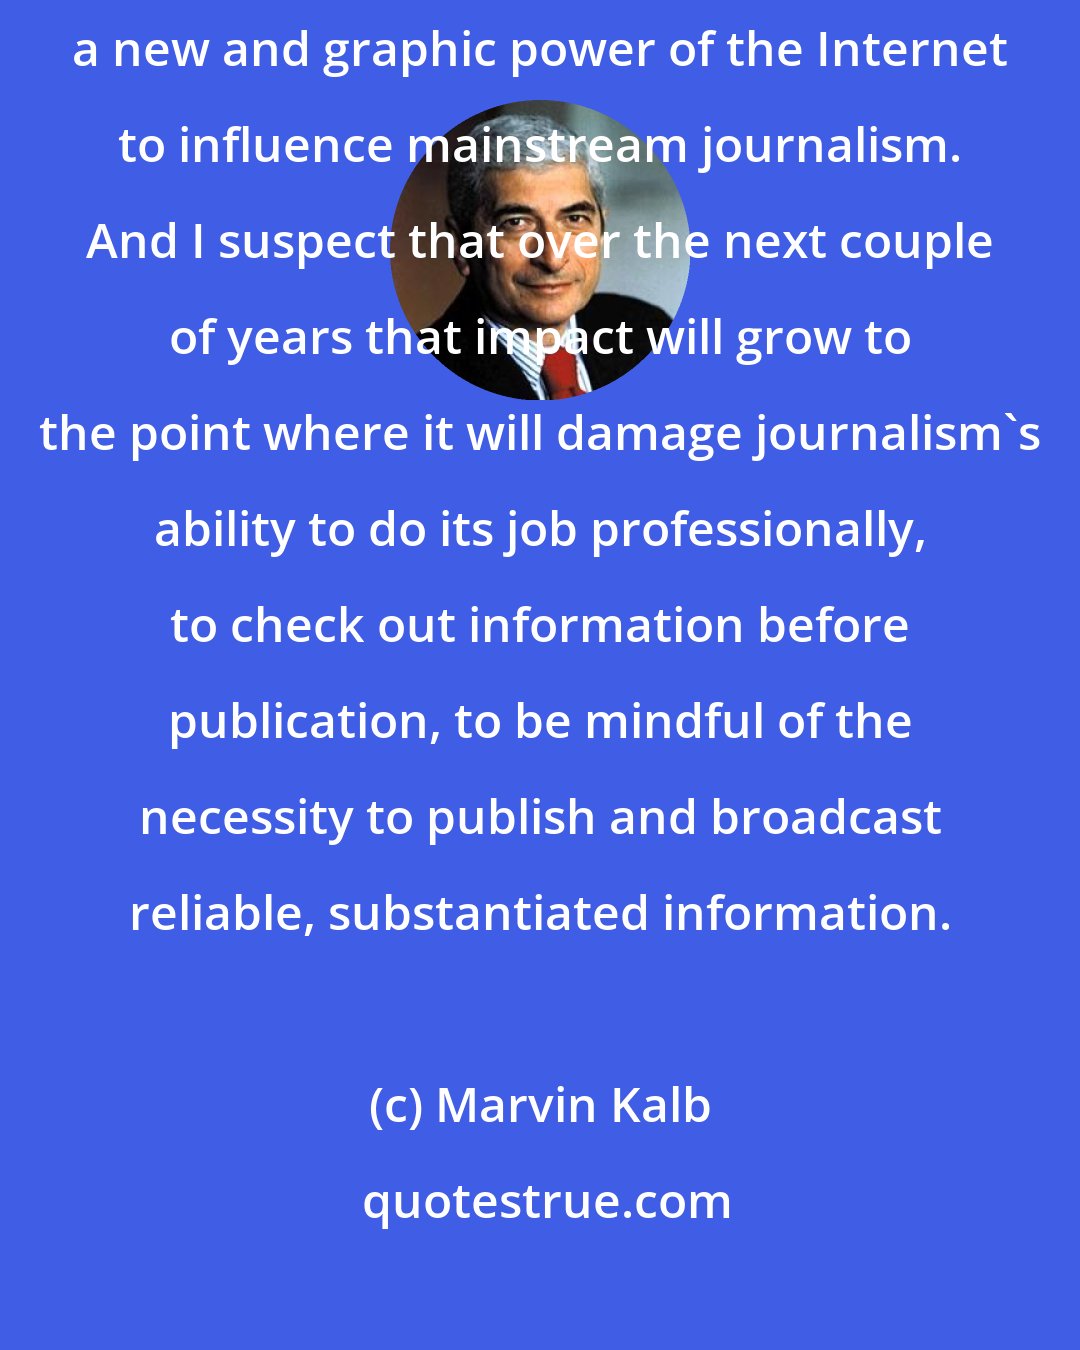 Marvin Kalb: Matt Drudge's role in the Monica Lewinski scandal] strikes me as a new and graphic power of the Internet to influence mainstream journalism. And I suspect that over the next couple of years that impact will grow to the point where it will damage journalism's ability to do its job professionally, to check out information before publication, to be mindful of the necessity to publish and broadcast reliable, substantiated information.